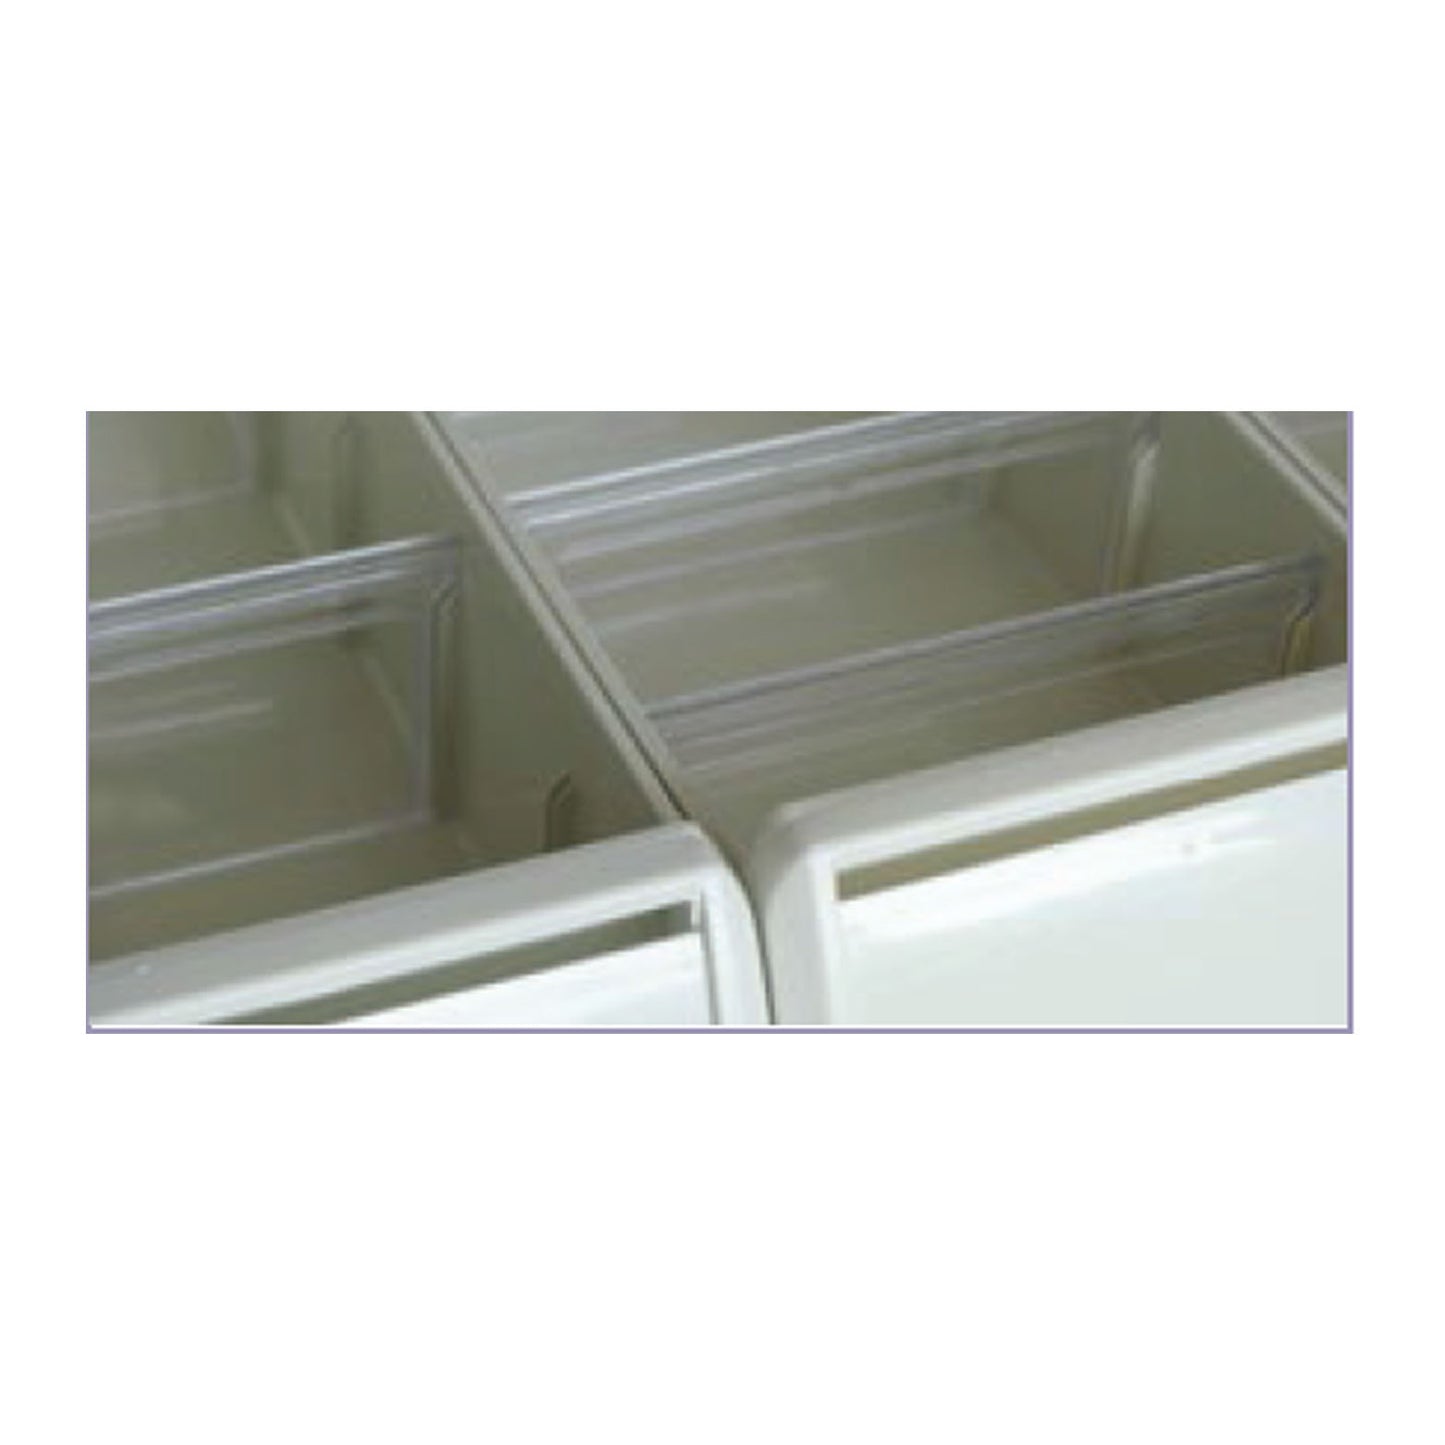 Pharmacy Medical - DWR-12C Replacement Trays to suit 515, 650 & 655 Trolley - Clear, divider option available